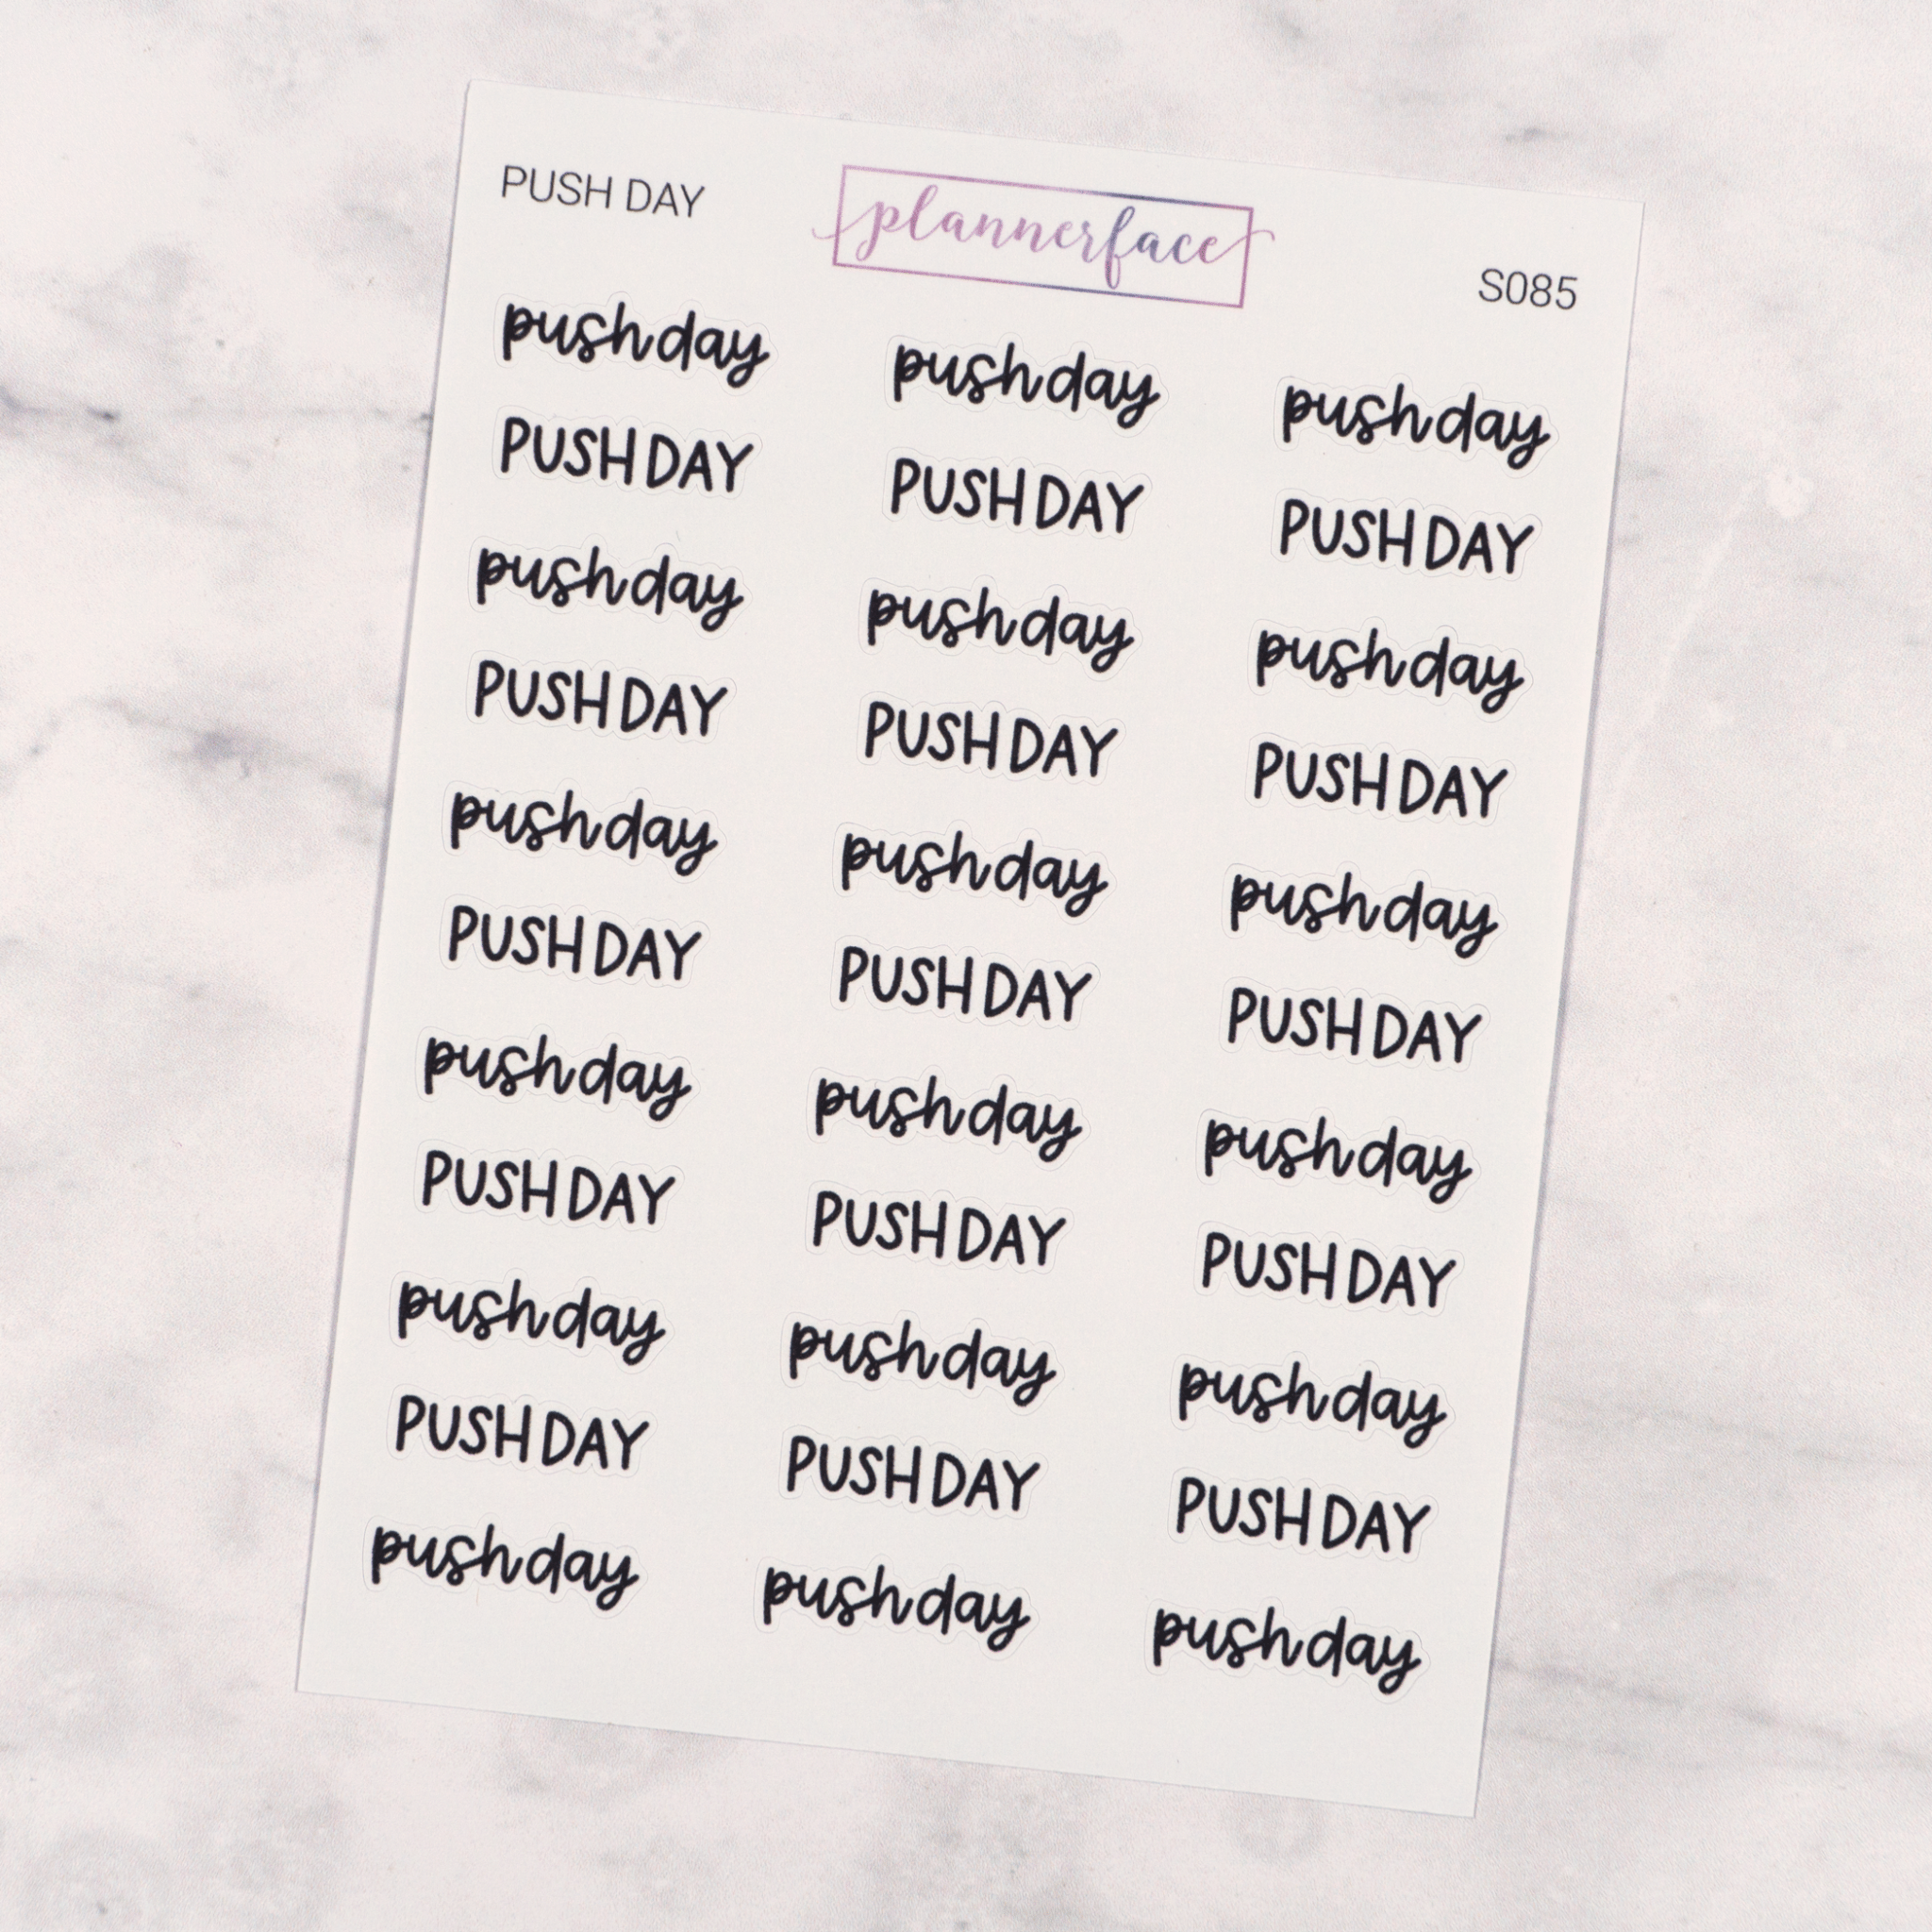 Push Day | Scripts by Plannerface